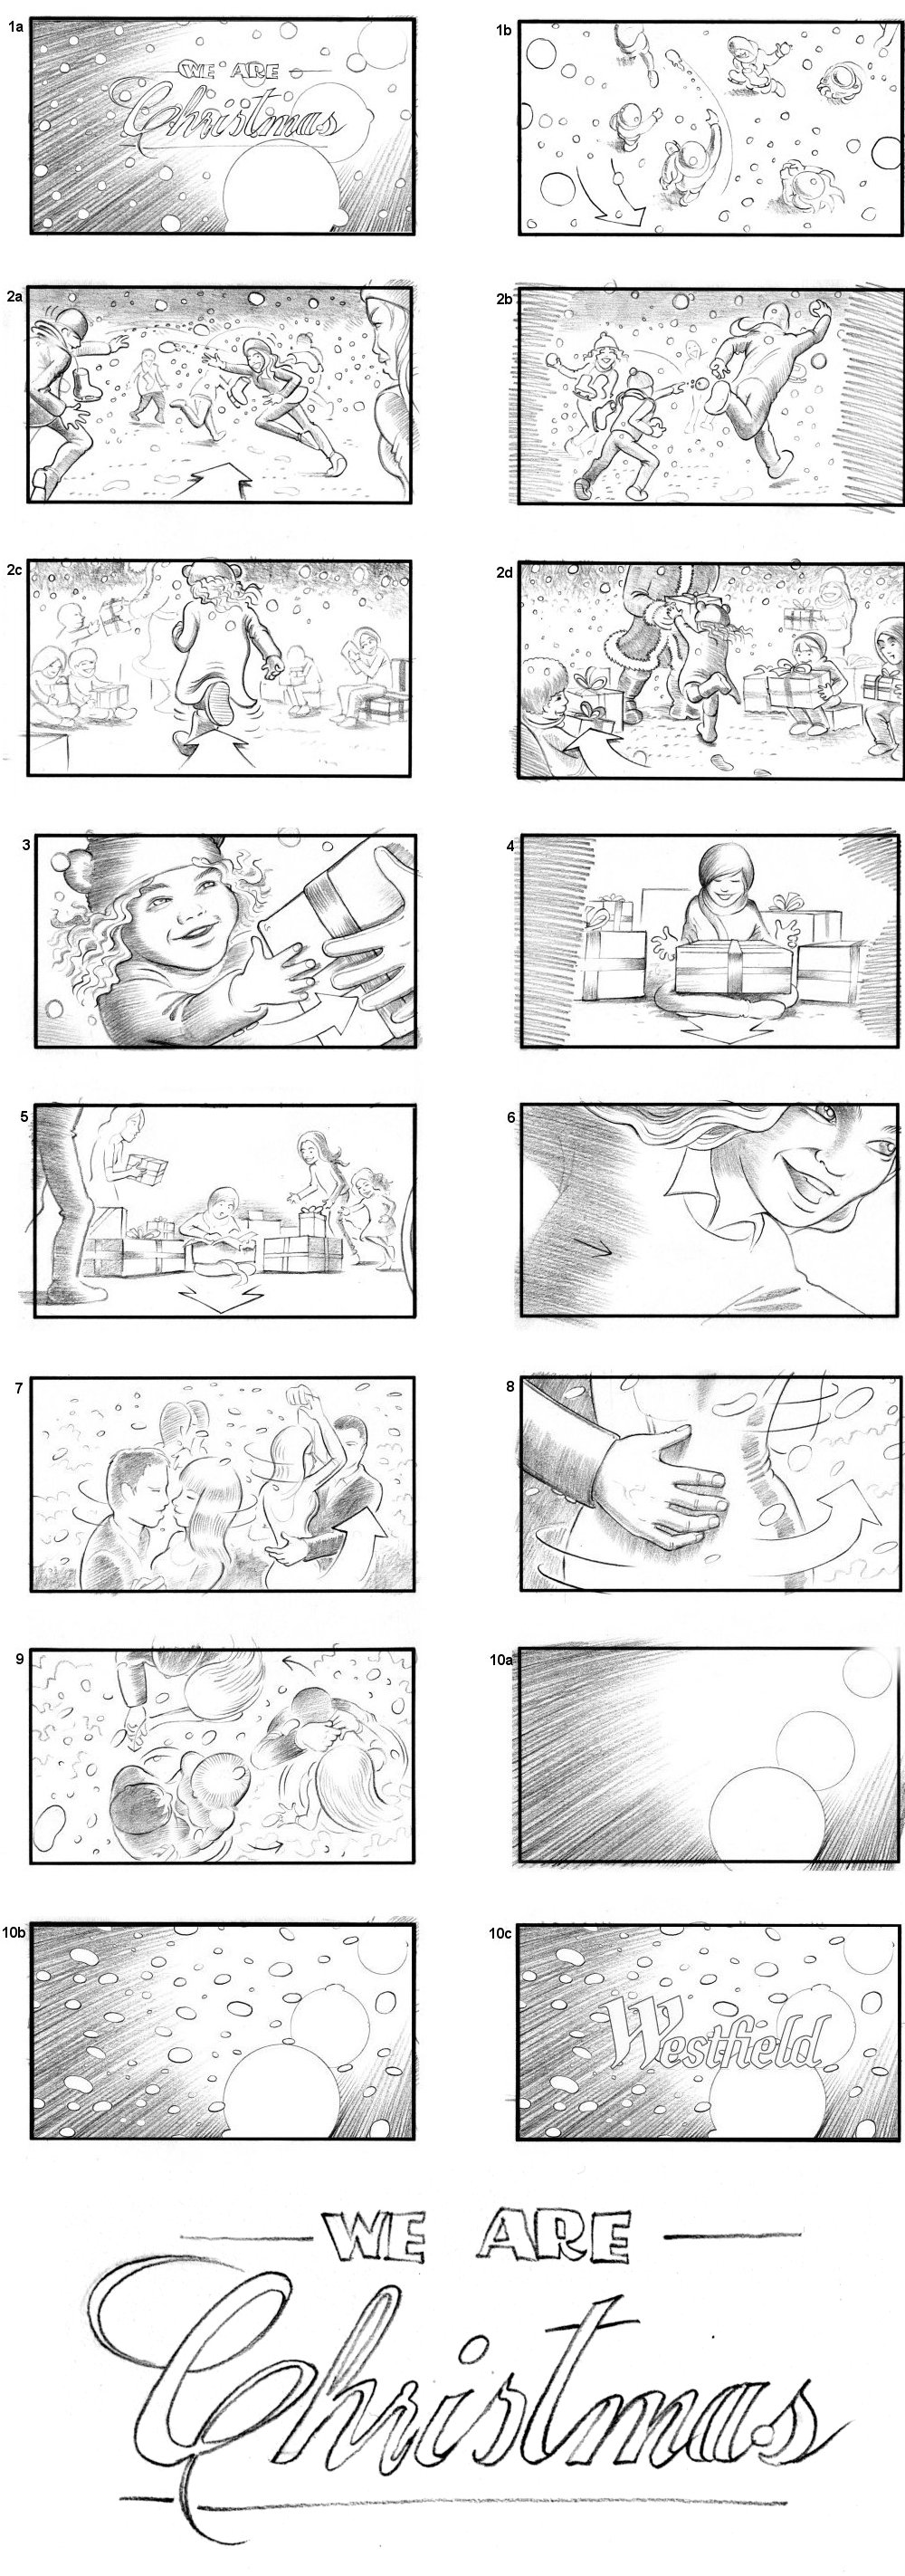 WESTFIELDS SHOPPING MALL STORYBOARD BY ANDY SPARROW